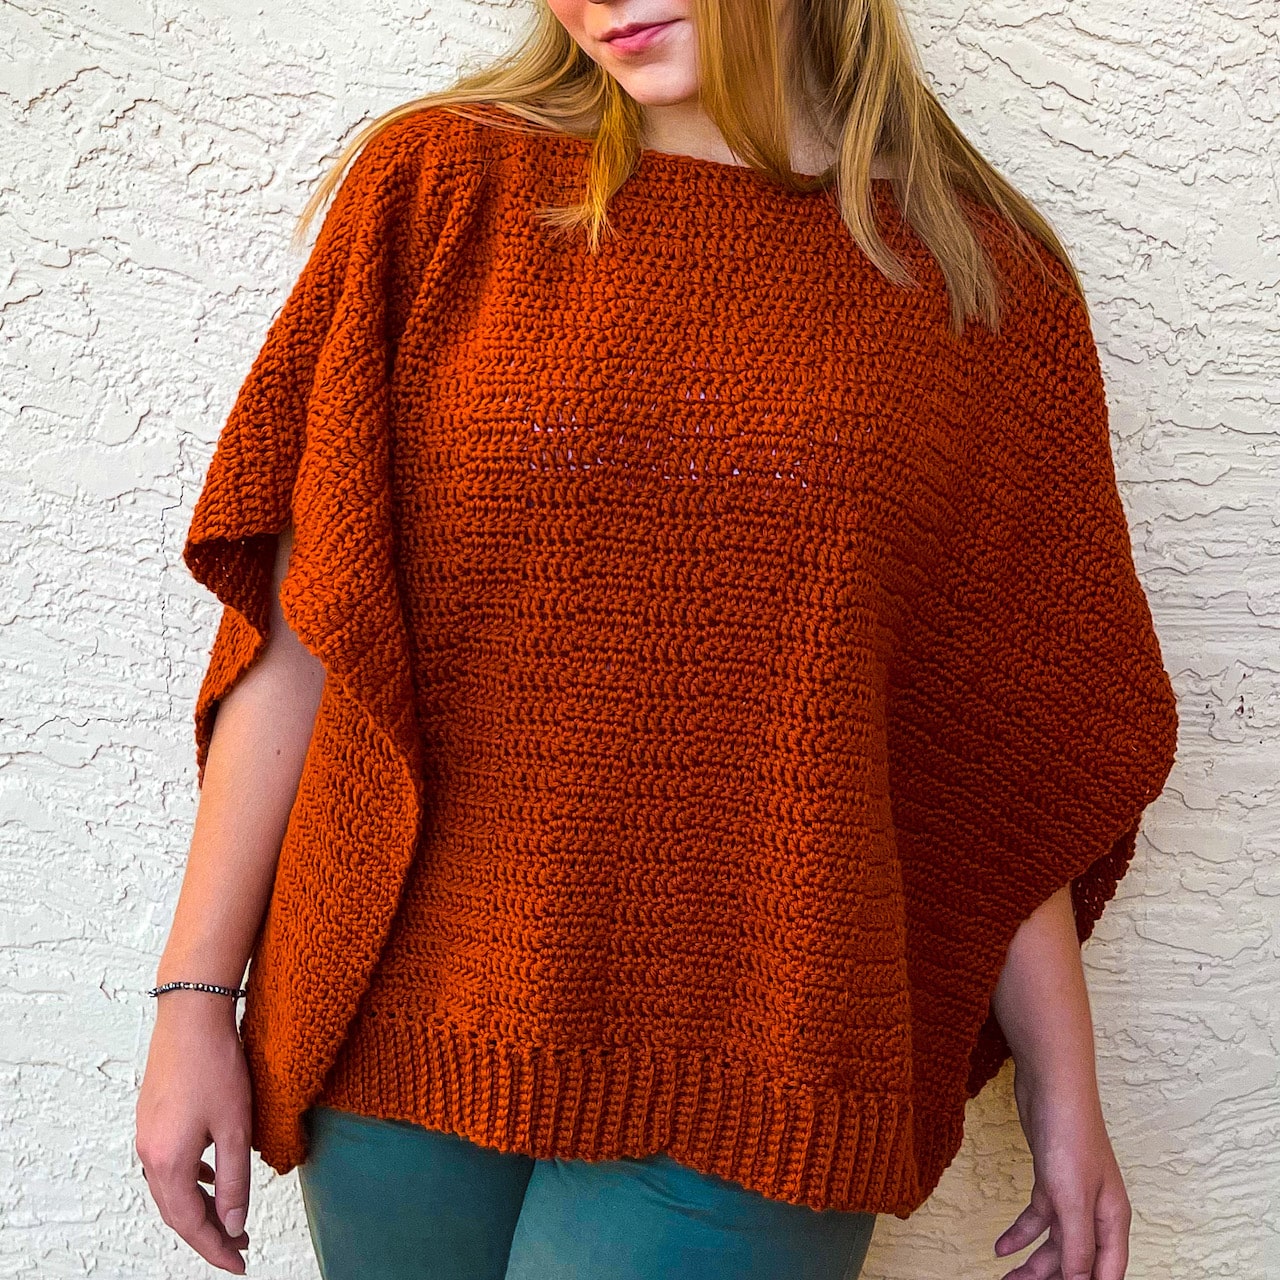 Furioso Pasteles acumular Free Crochet Poncho Pattern | ITCHIN' FOR SOME STITCHIN'